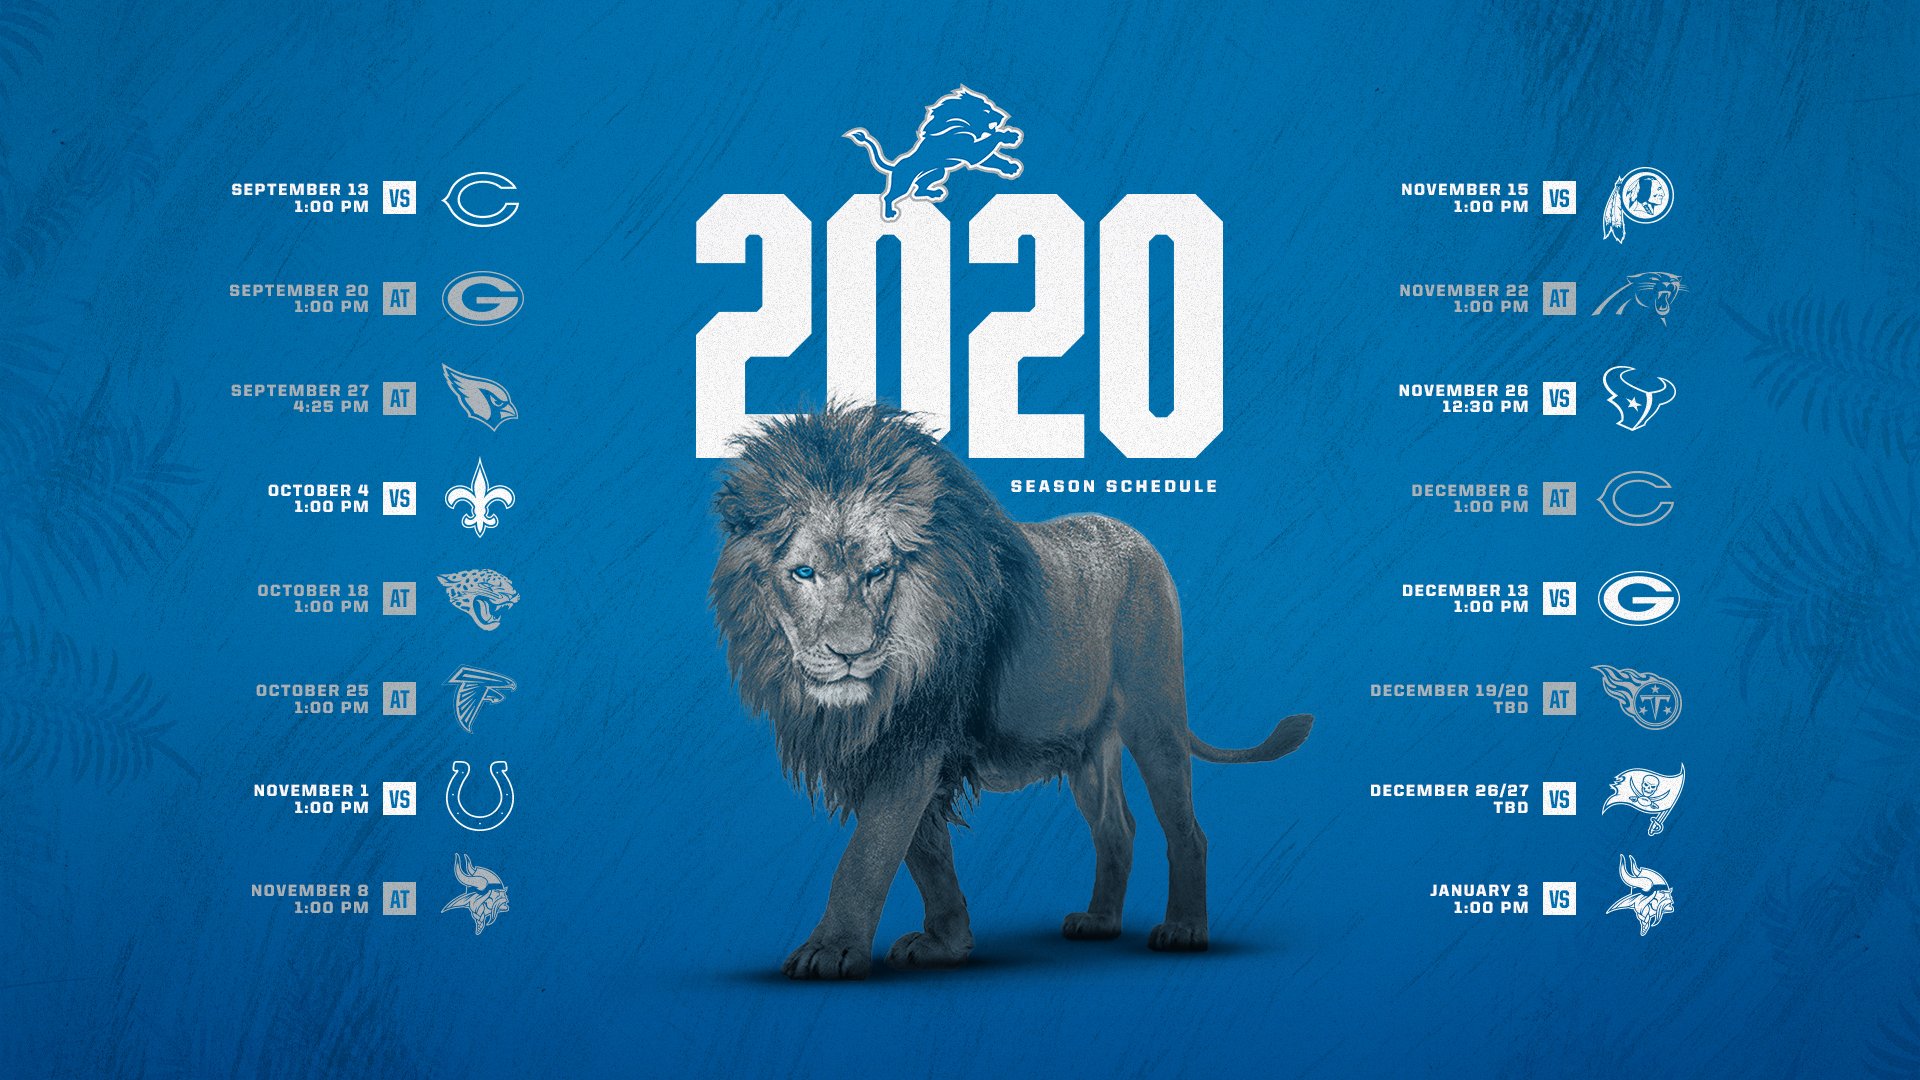 Detroit Lions One Pride Wallpapers